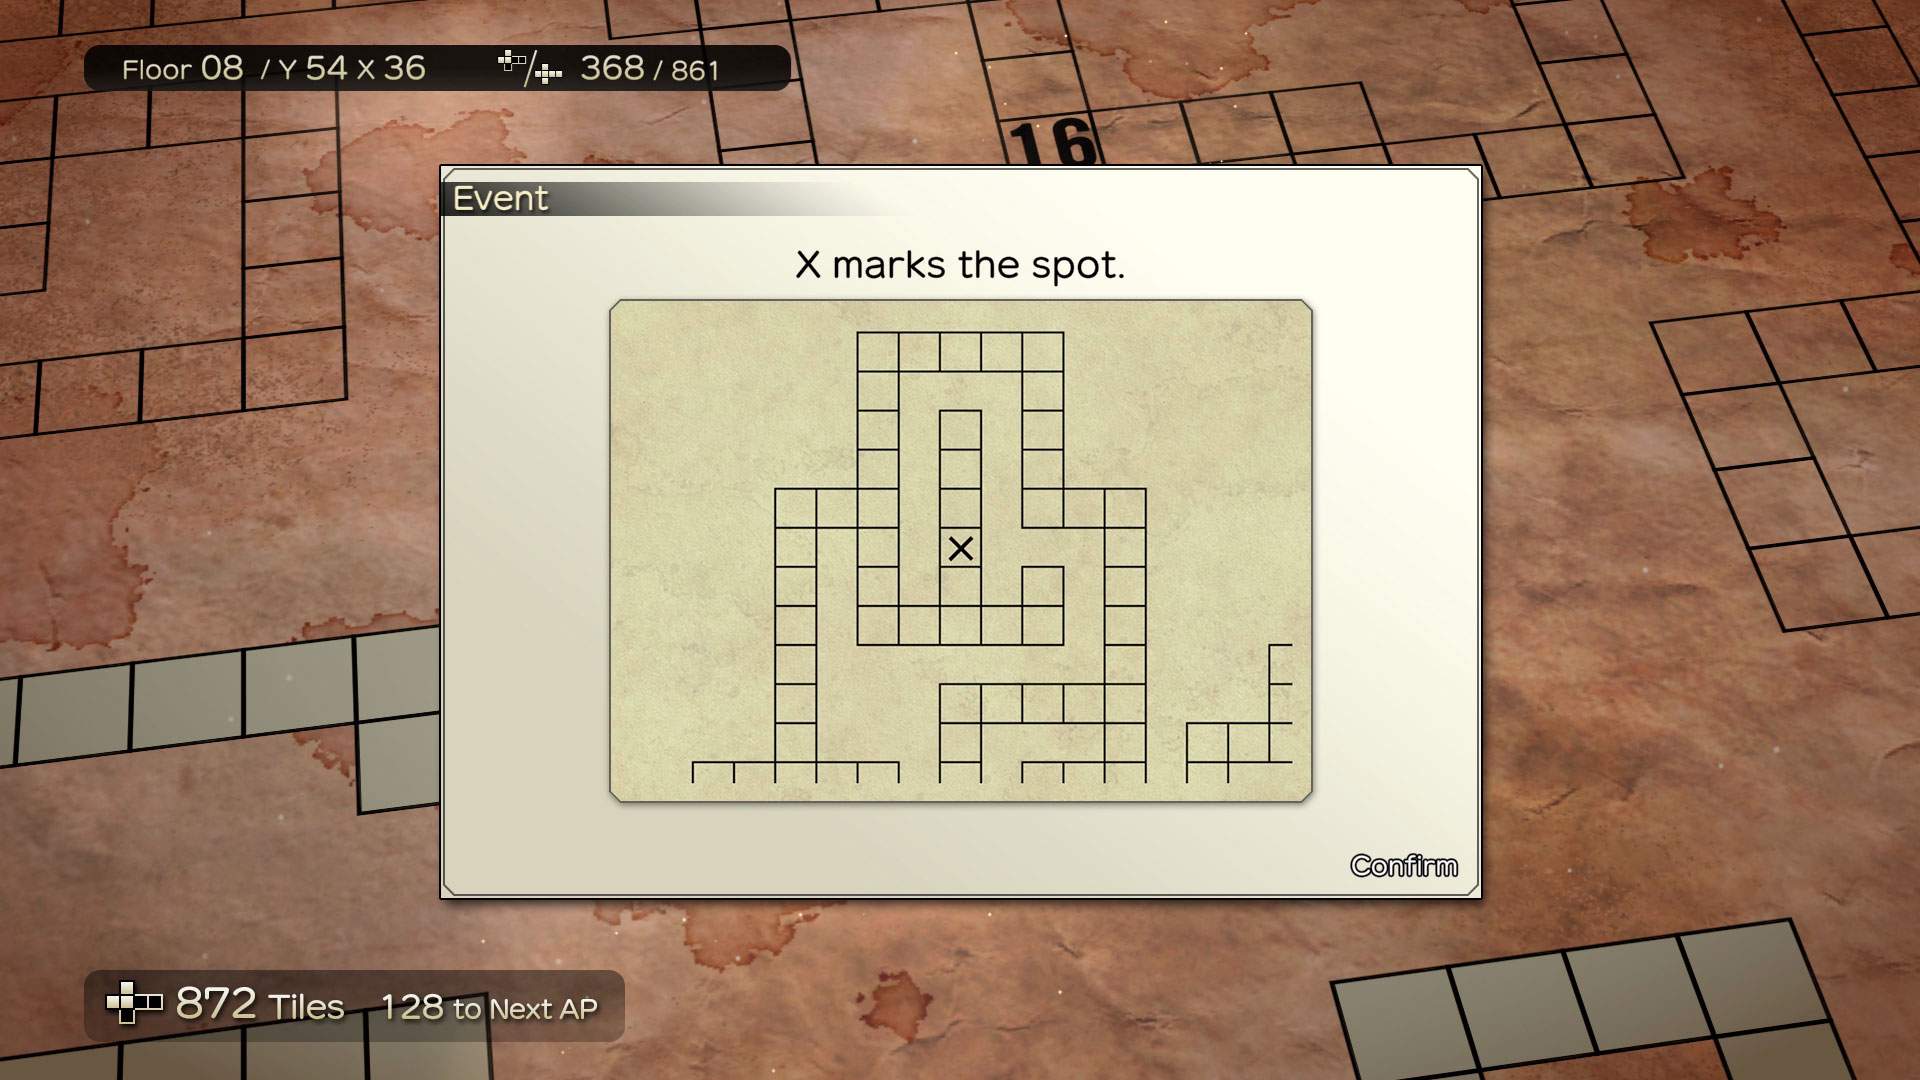 Gameplay screenshot showing an event - "X marks the spot" with a map and a cross in the middle.